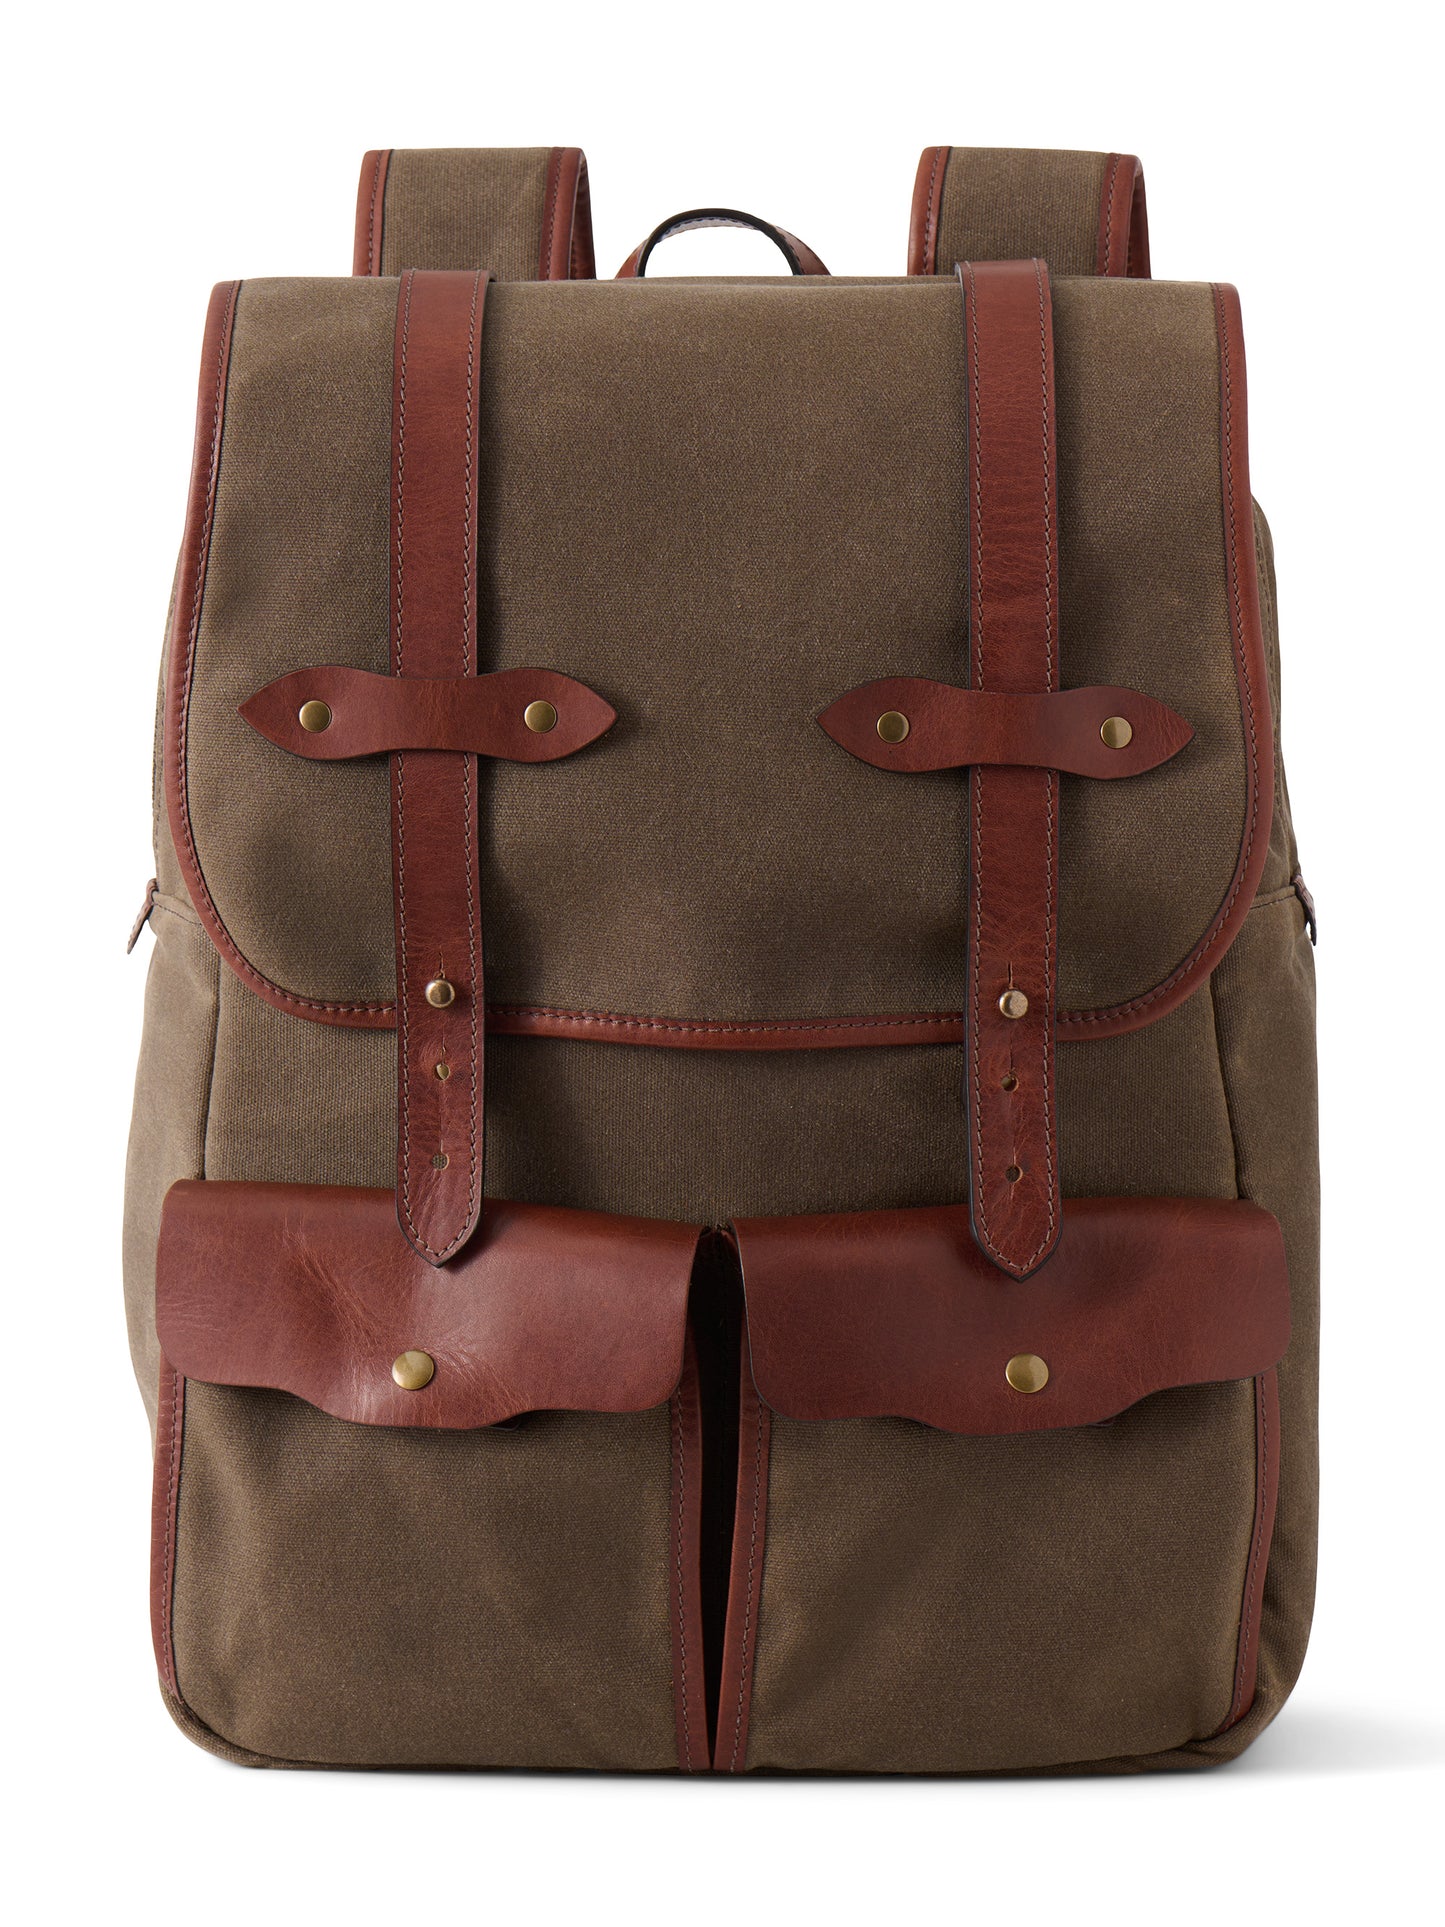 Jackson Wayne Founder's Backpack - full grain leather and heritage waxed canvas, solid brass, pictured in vintage brown semi vegetable tanned leather